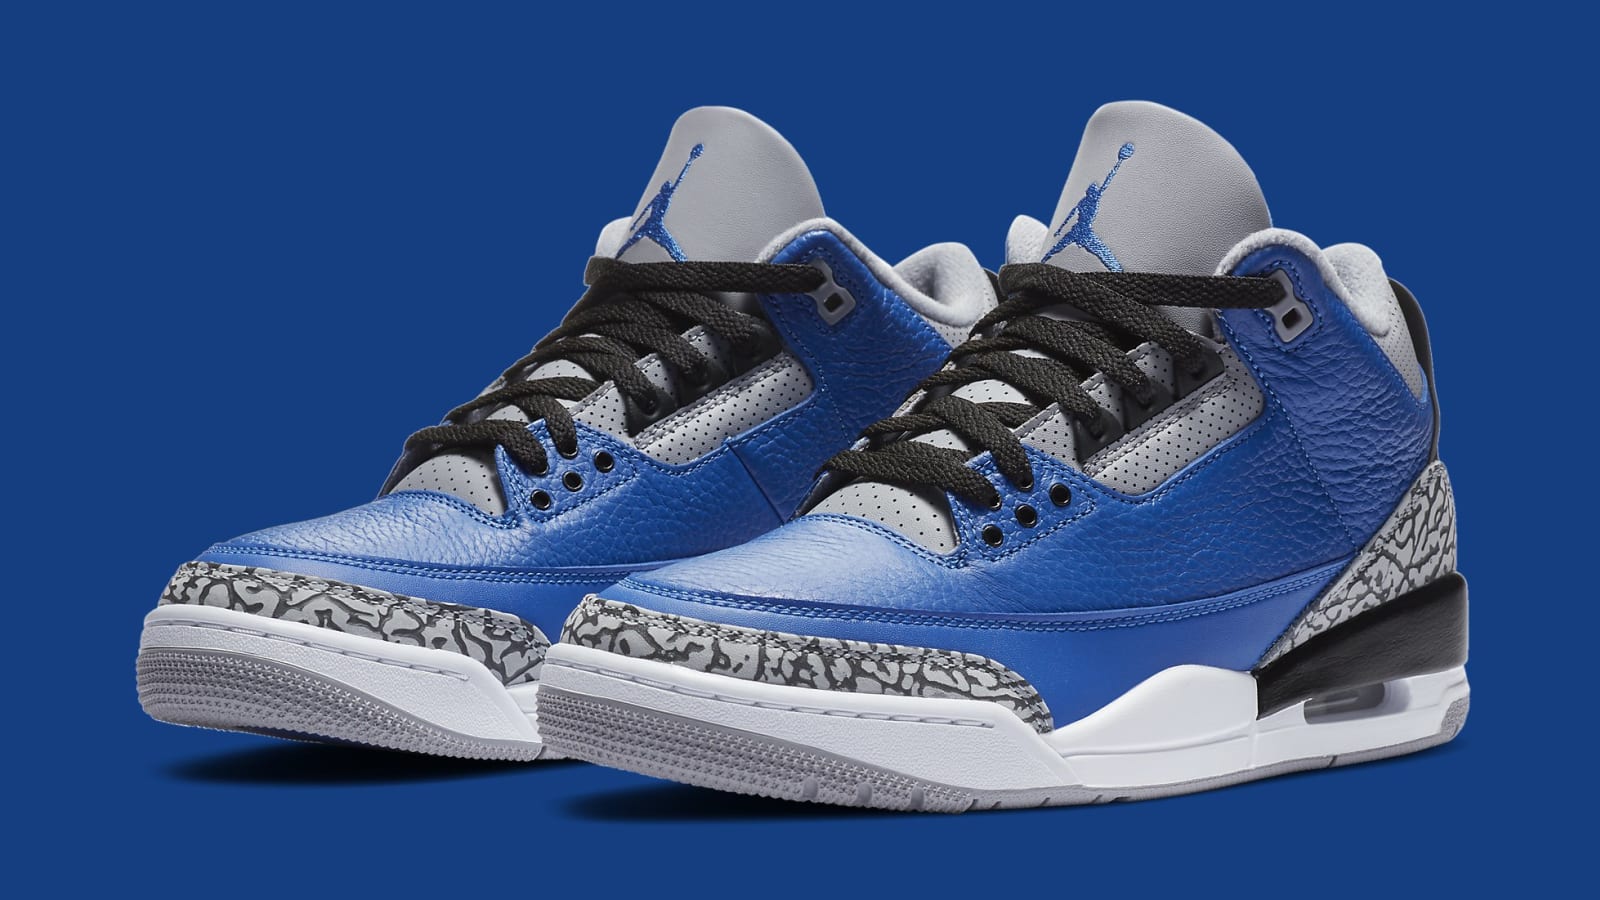 Air Jordan 3 &quot;Varsity Royal&quot; Officially Revealed: Release Info